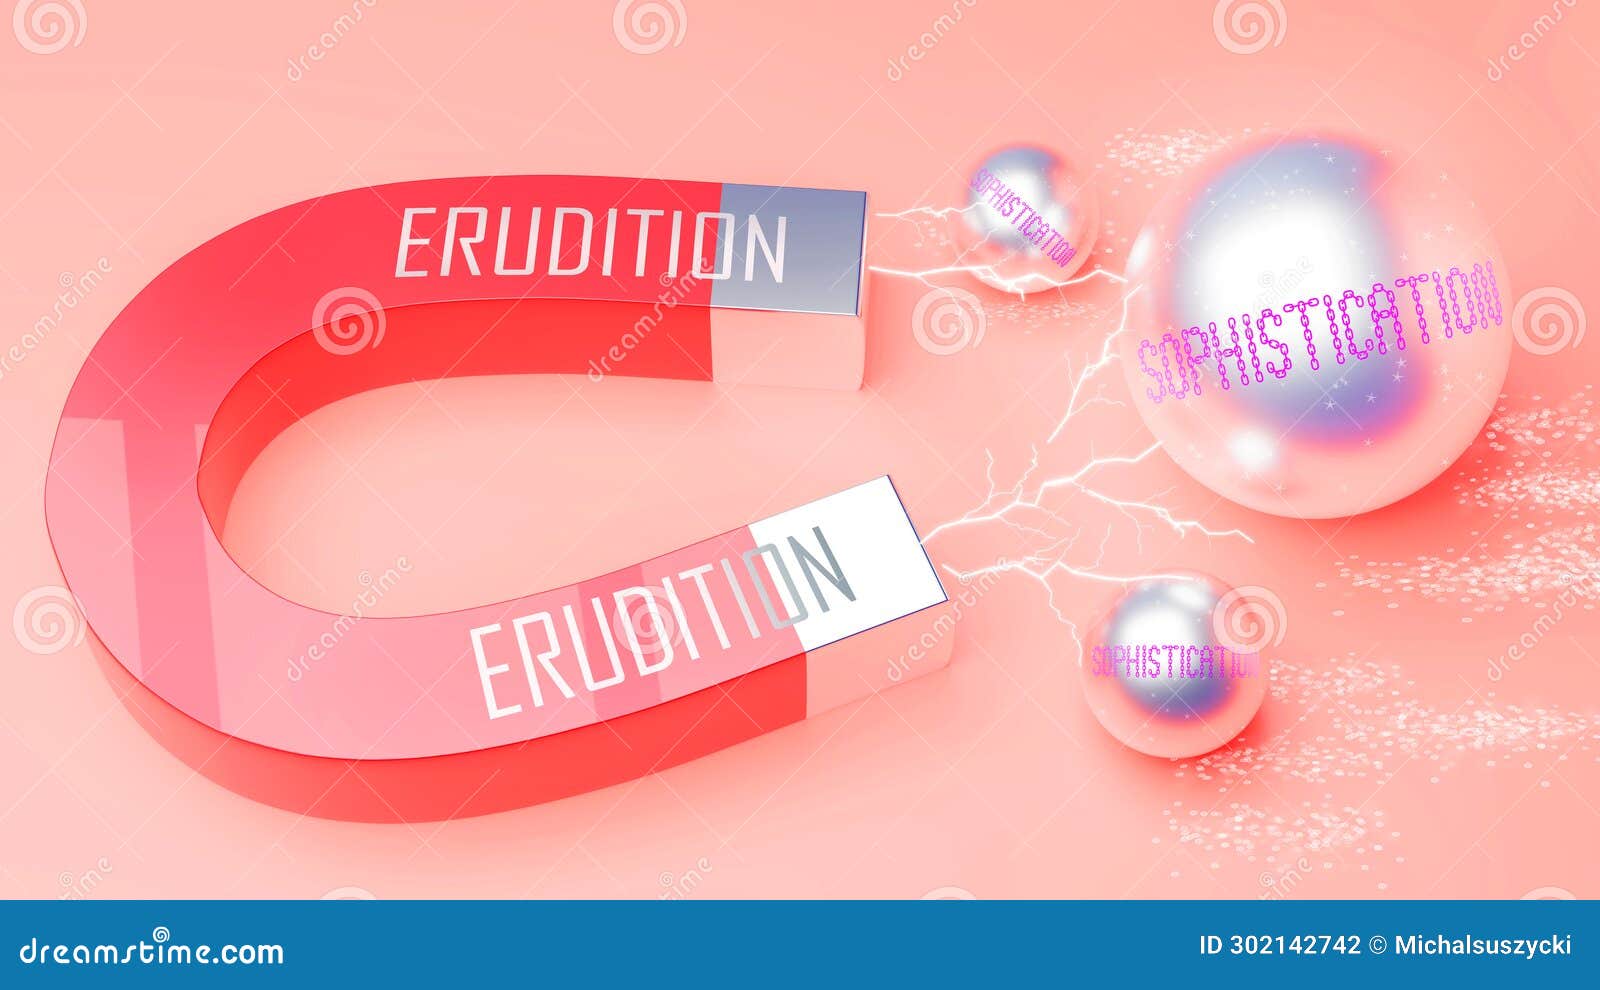 erudition attracts sophistication. a magnet metaphor in which erudition attracts multiple parts of sophistication. cause and